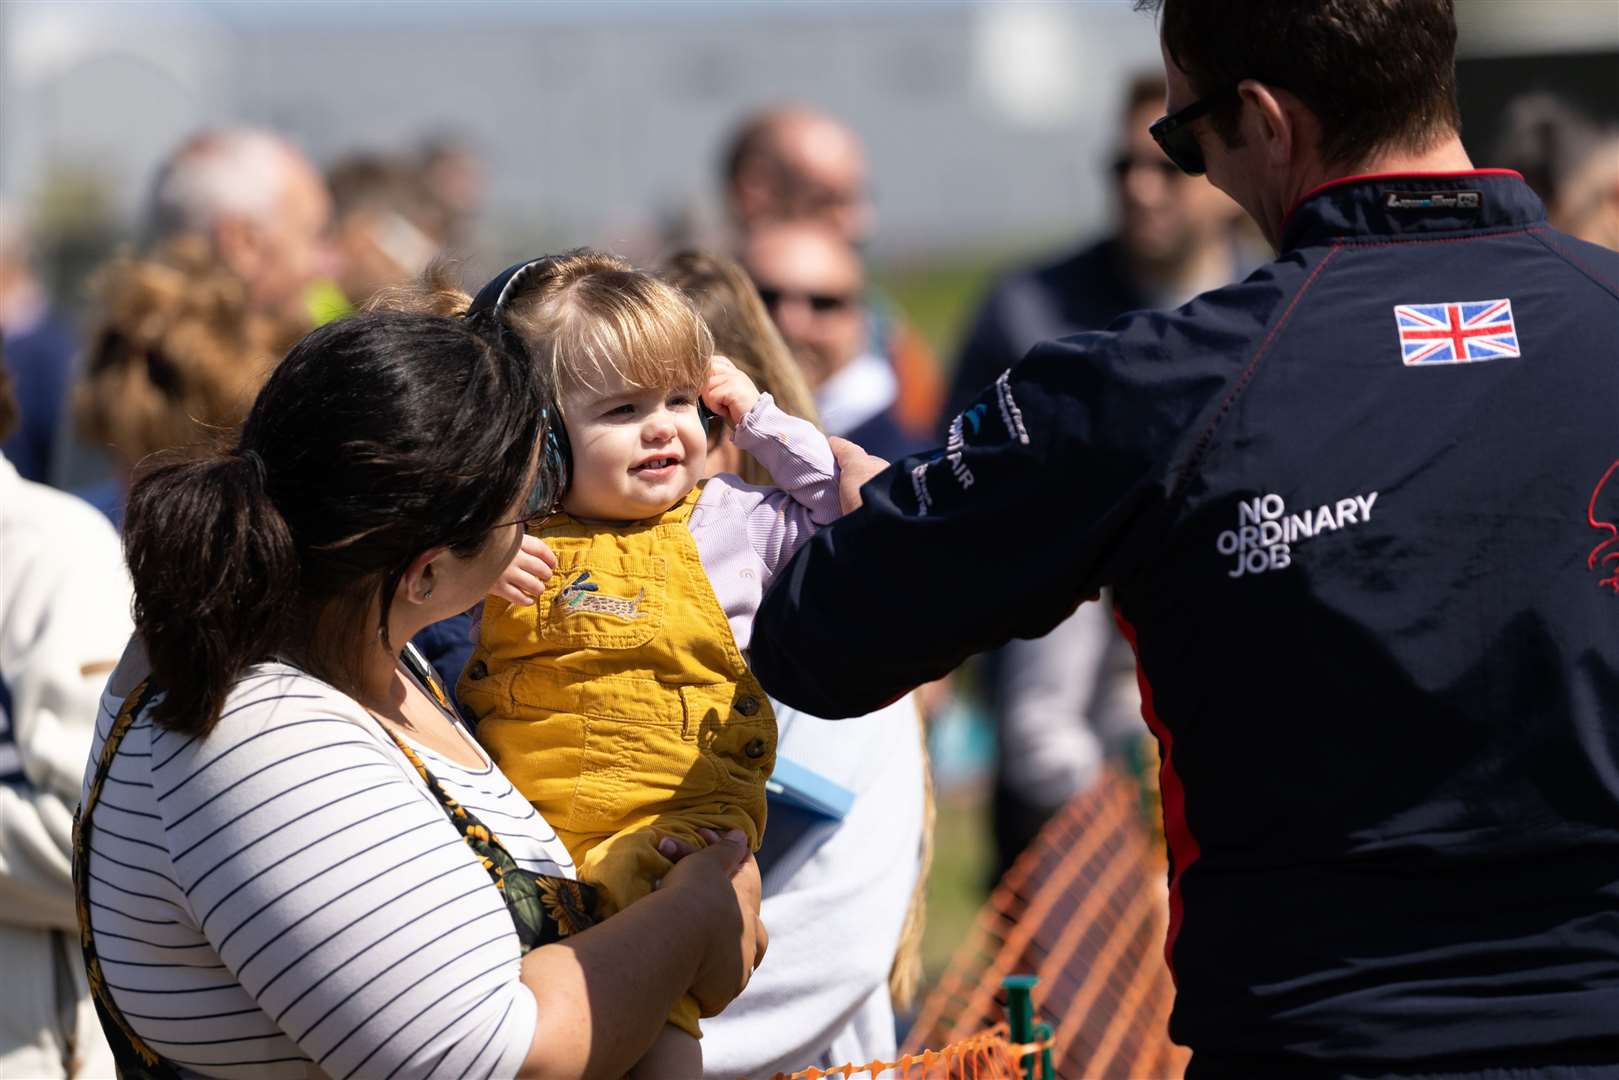 Saturday's friends and family day at RAF Lossiemouth